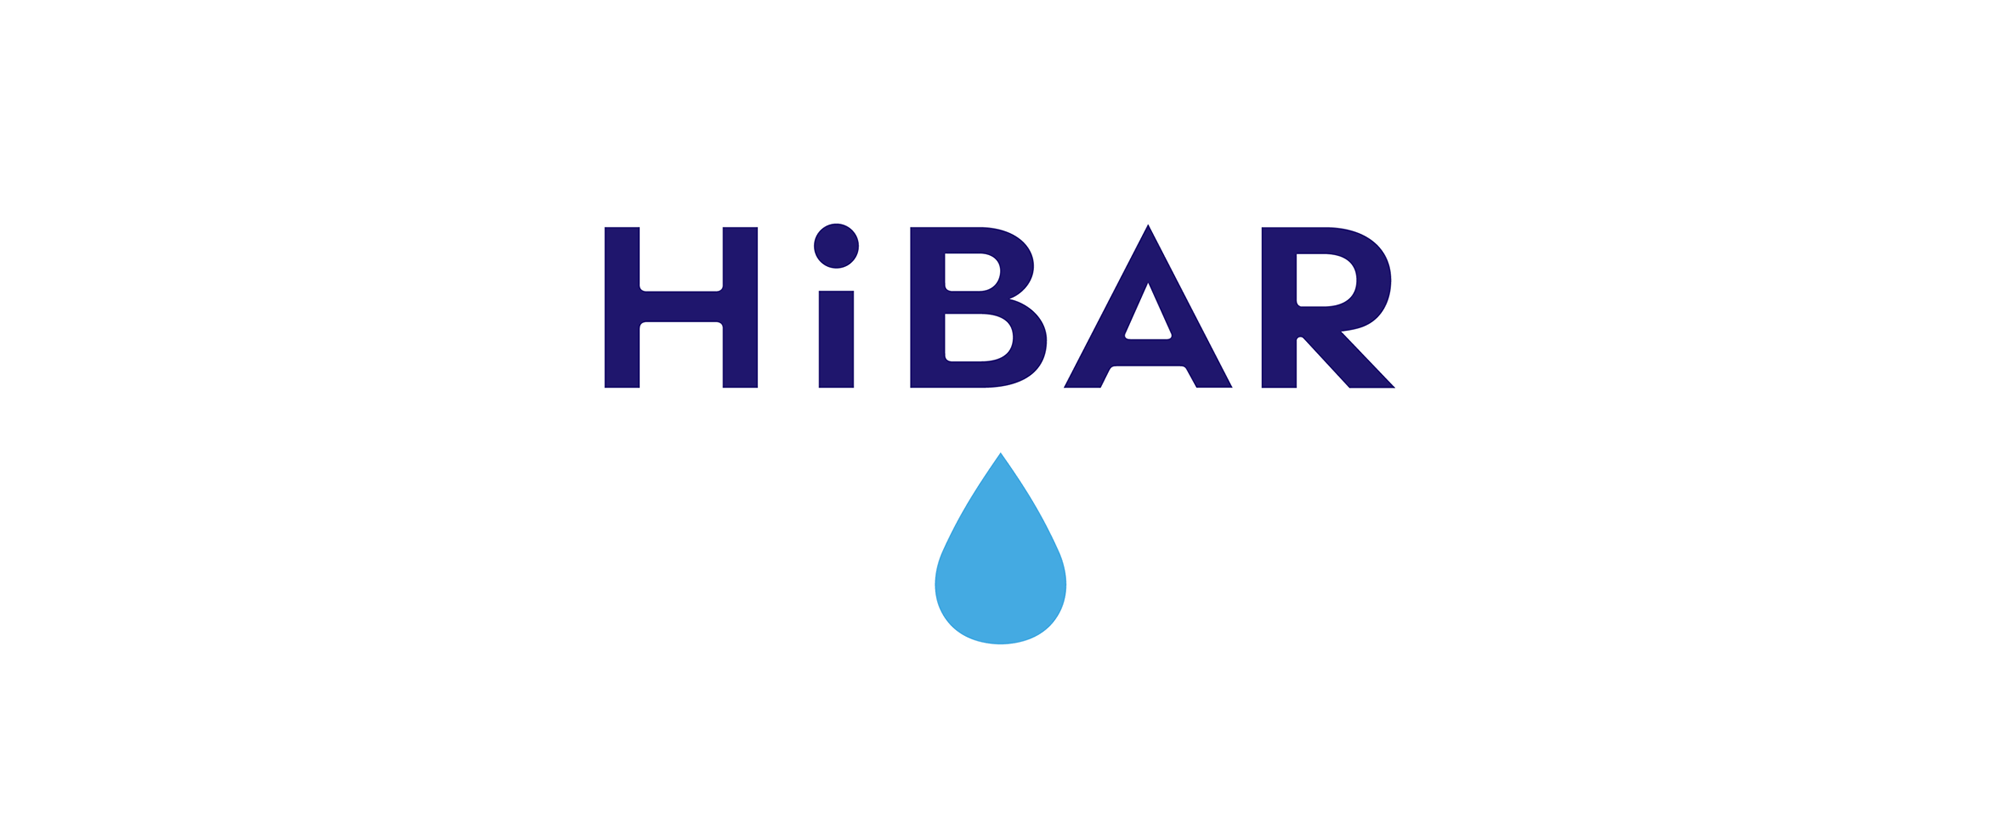 New Logo and Packaging for HiBAR by Persuasion Arts & Sciences and Werner Design Werks